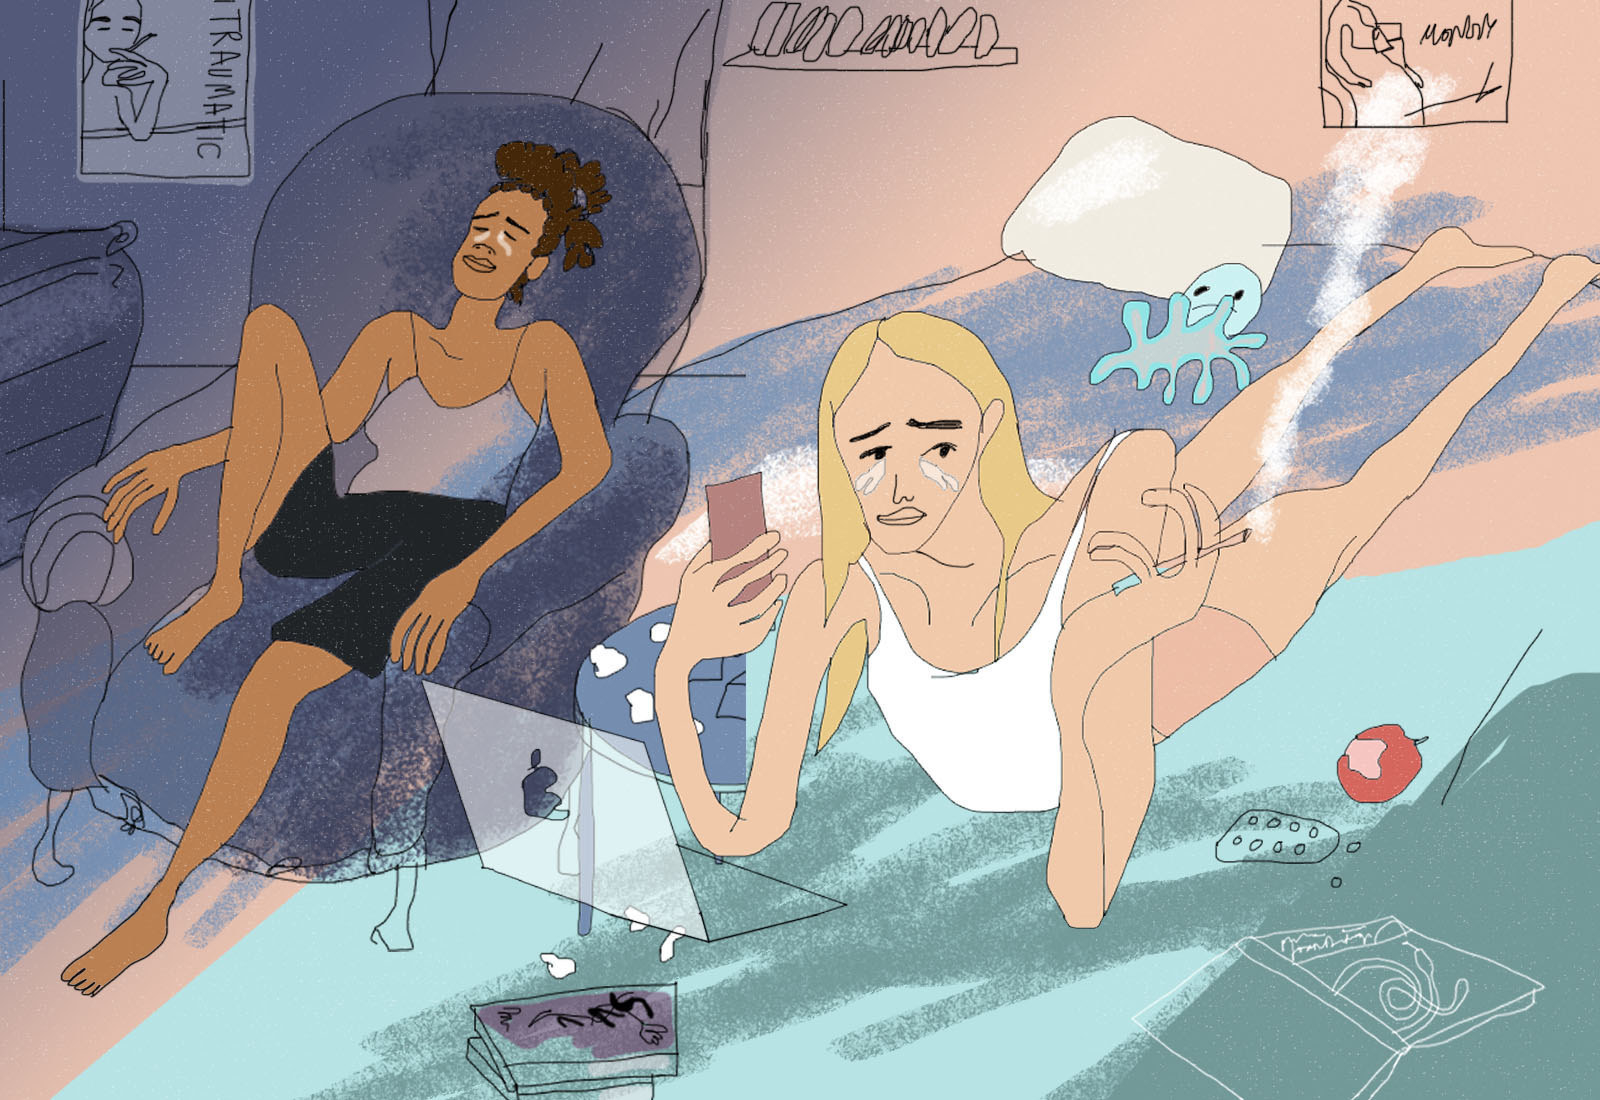 illustrations of one sad girl on the left crying on the couch and another sad girl on the right lying on her stomach smoking and looking at her phone